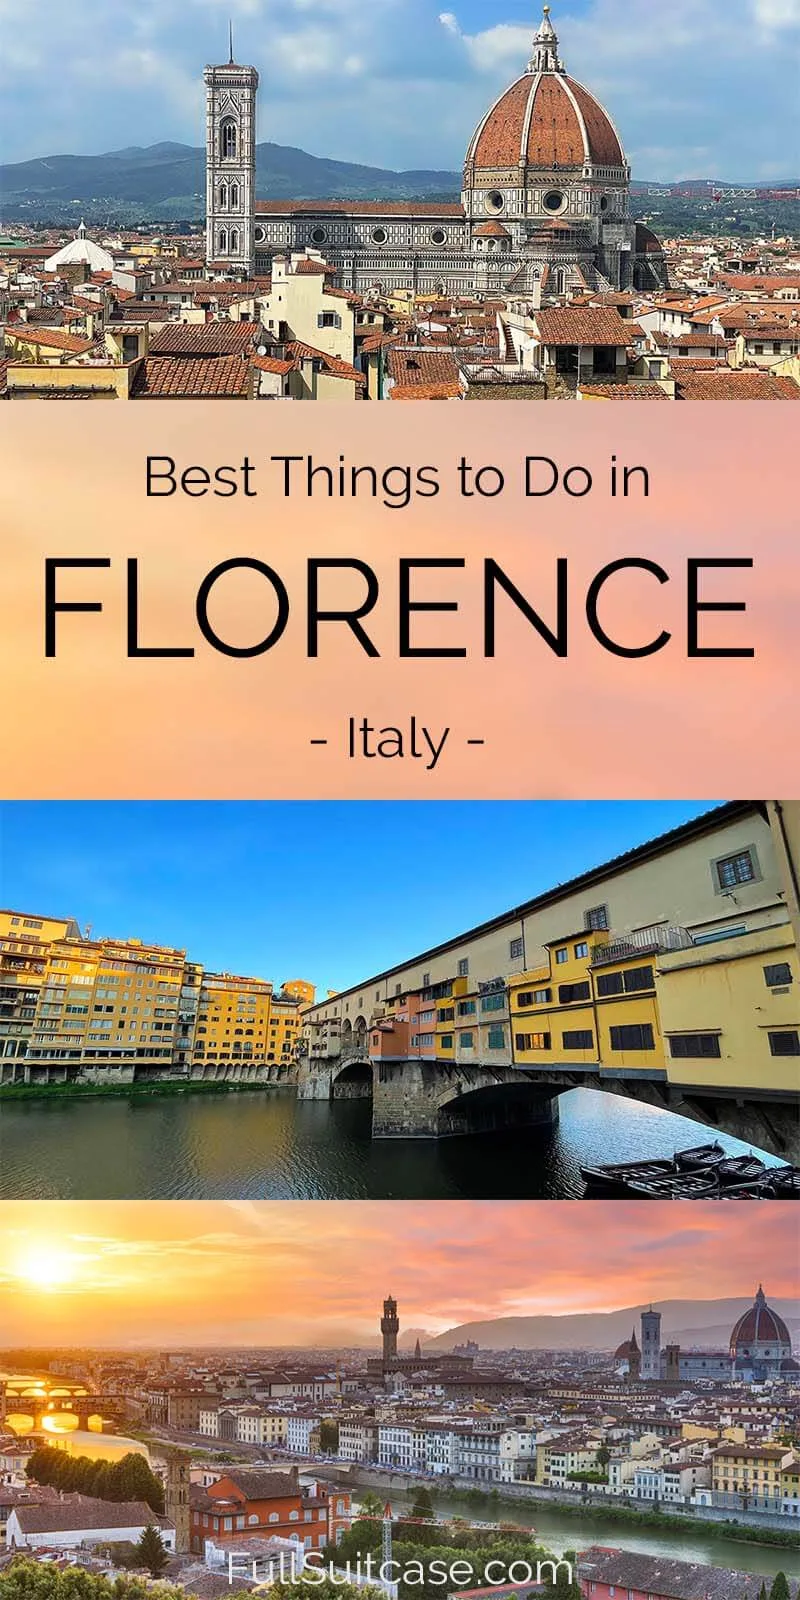 Top things to do in Florence, Italy